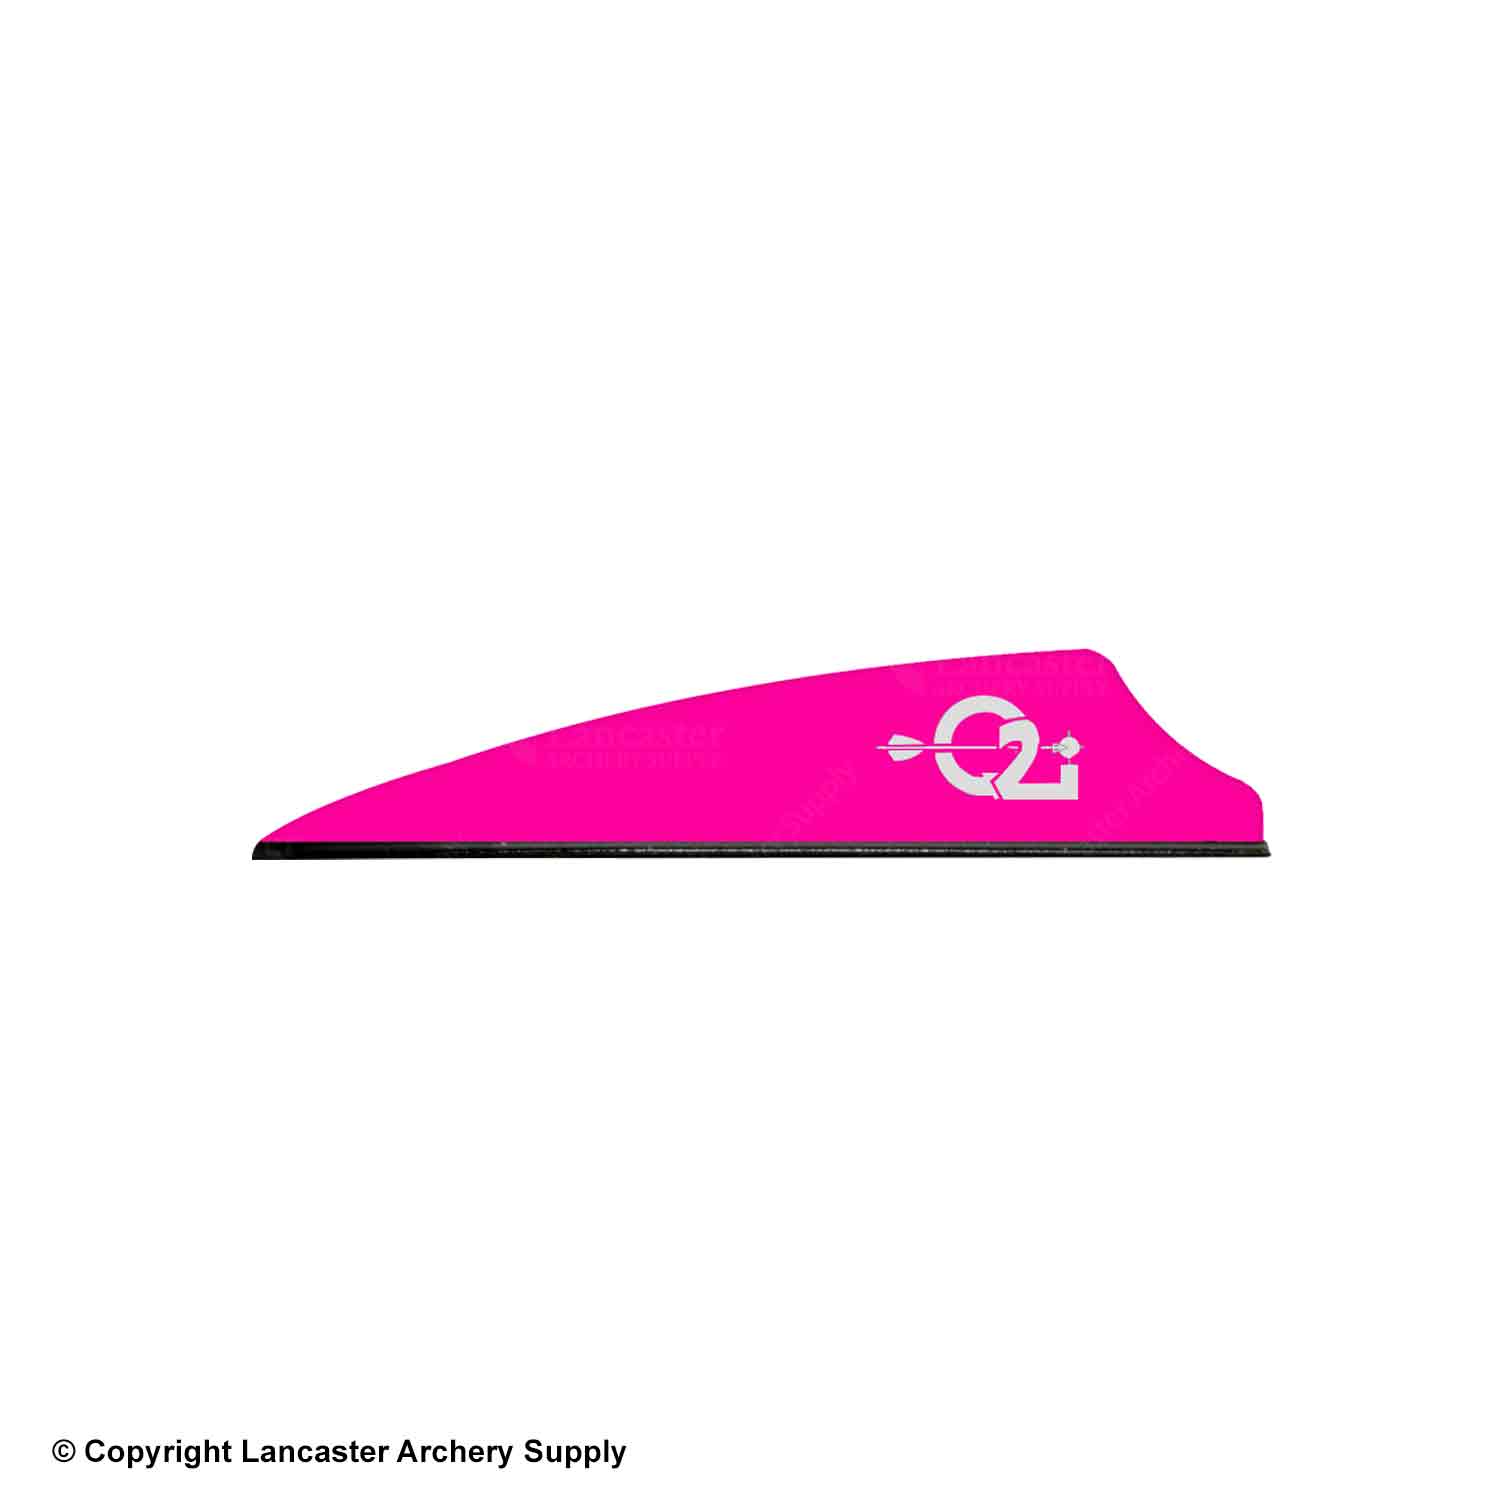 Shield cut vane that is hot pink, has a black base, and silver Q2i logo.